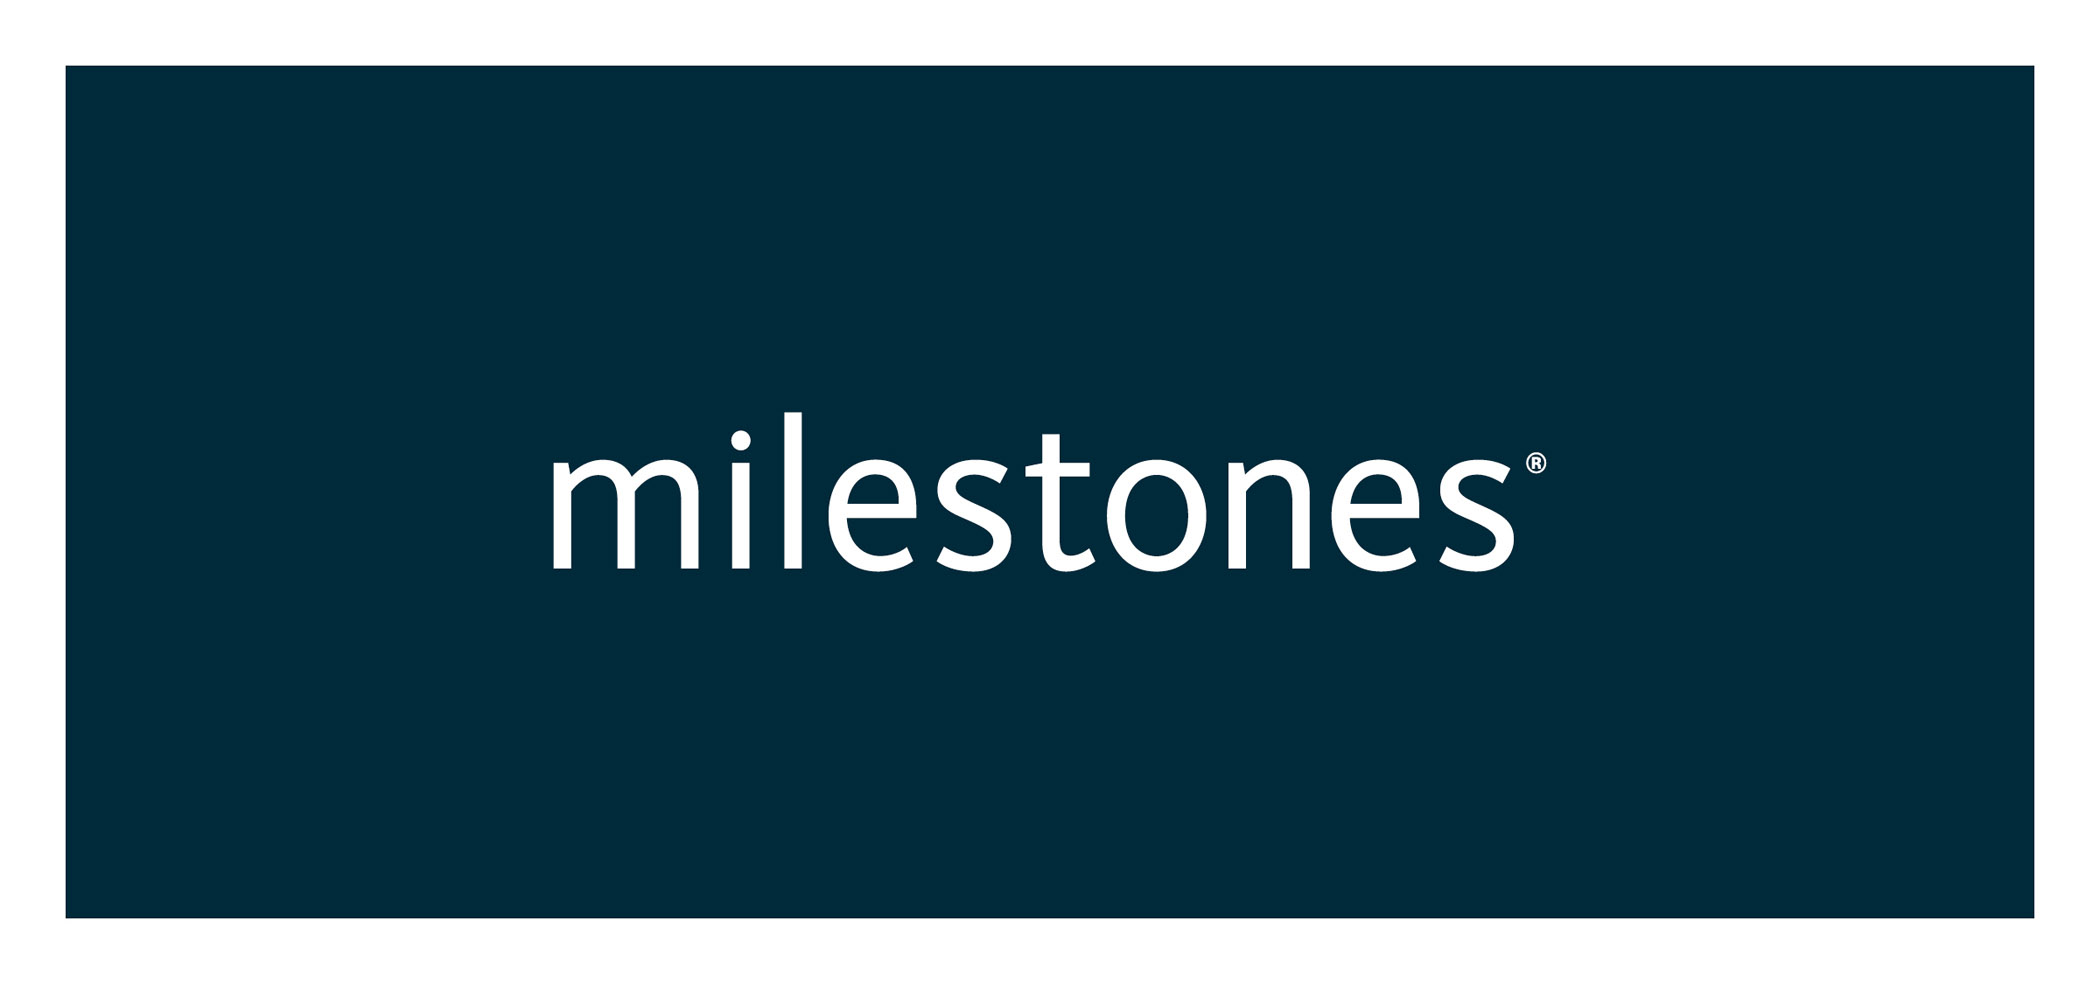 *Valid at Milestones Masonville or South London with purchase of entrée. Limit one coupon per party of two. Cannot be combined with any other coupon, discount or prix fixe menu offer. Coupon must be surrendered at time of redemption. Card has no cash value. Dine-in only. ® Registered Trademark of Foodtastic.